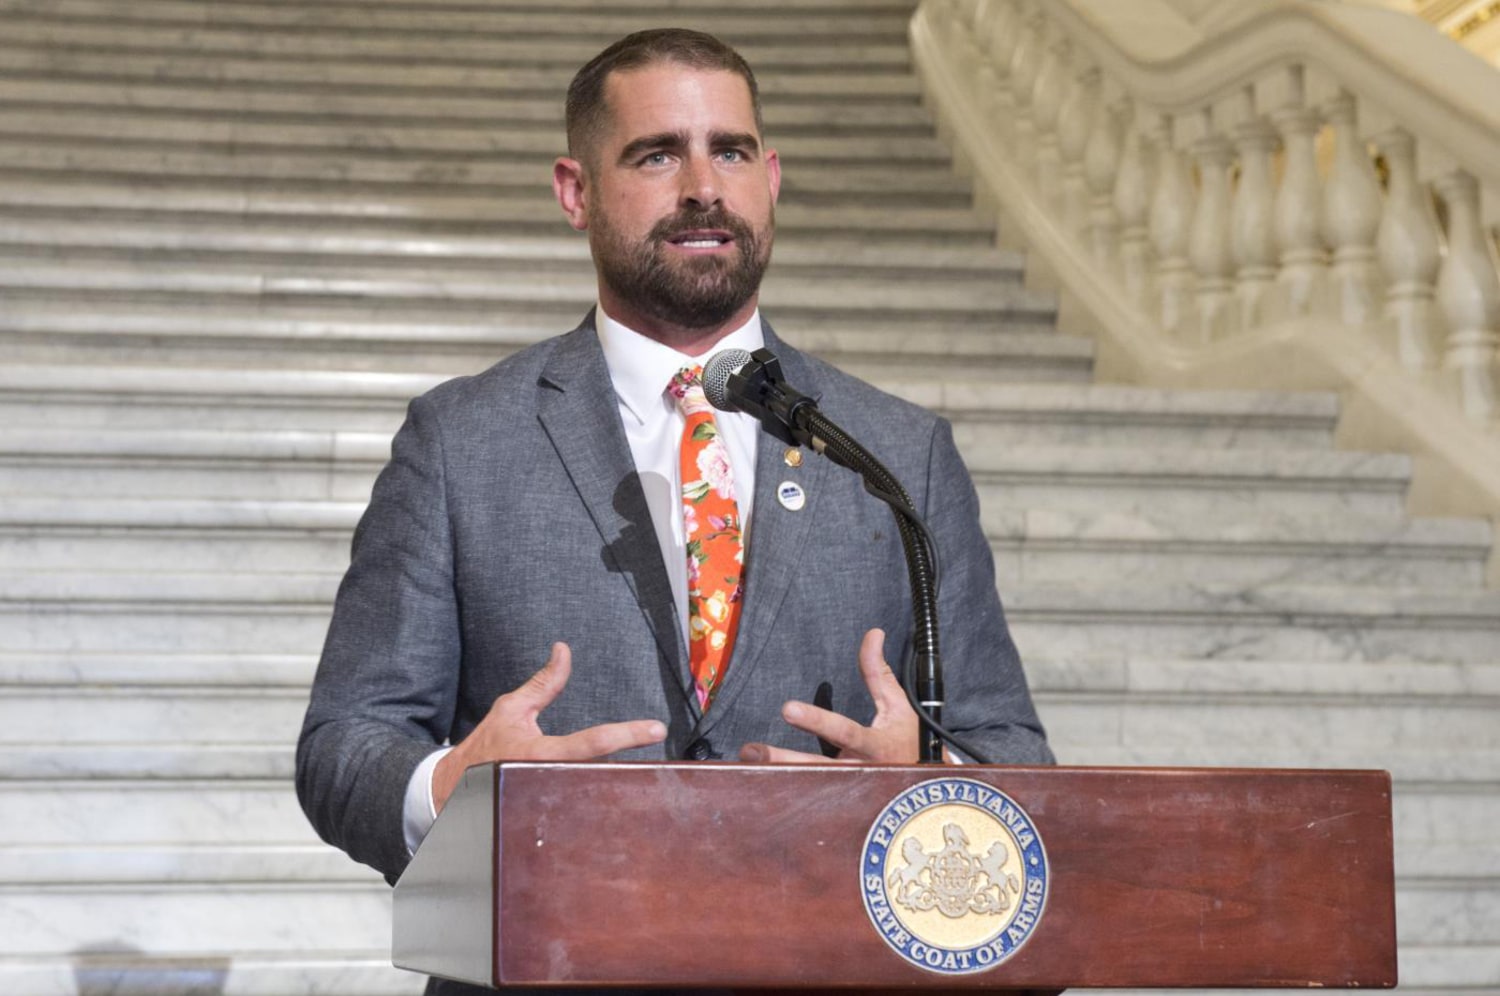 The 0.1 Percent Gayborhood lawmaker Brian Sims perfects the political counterpunch picture